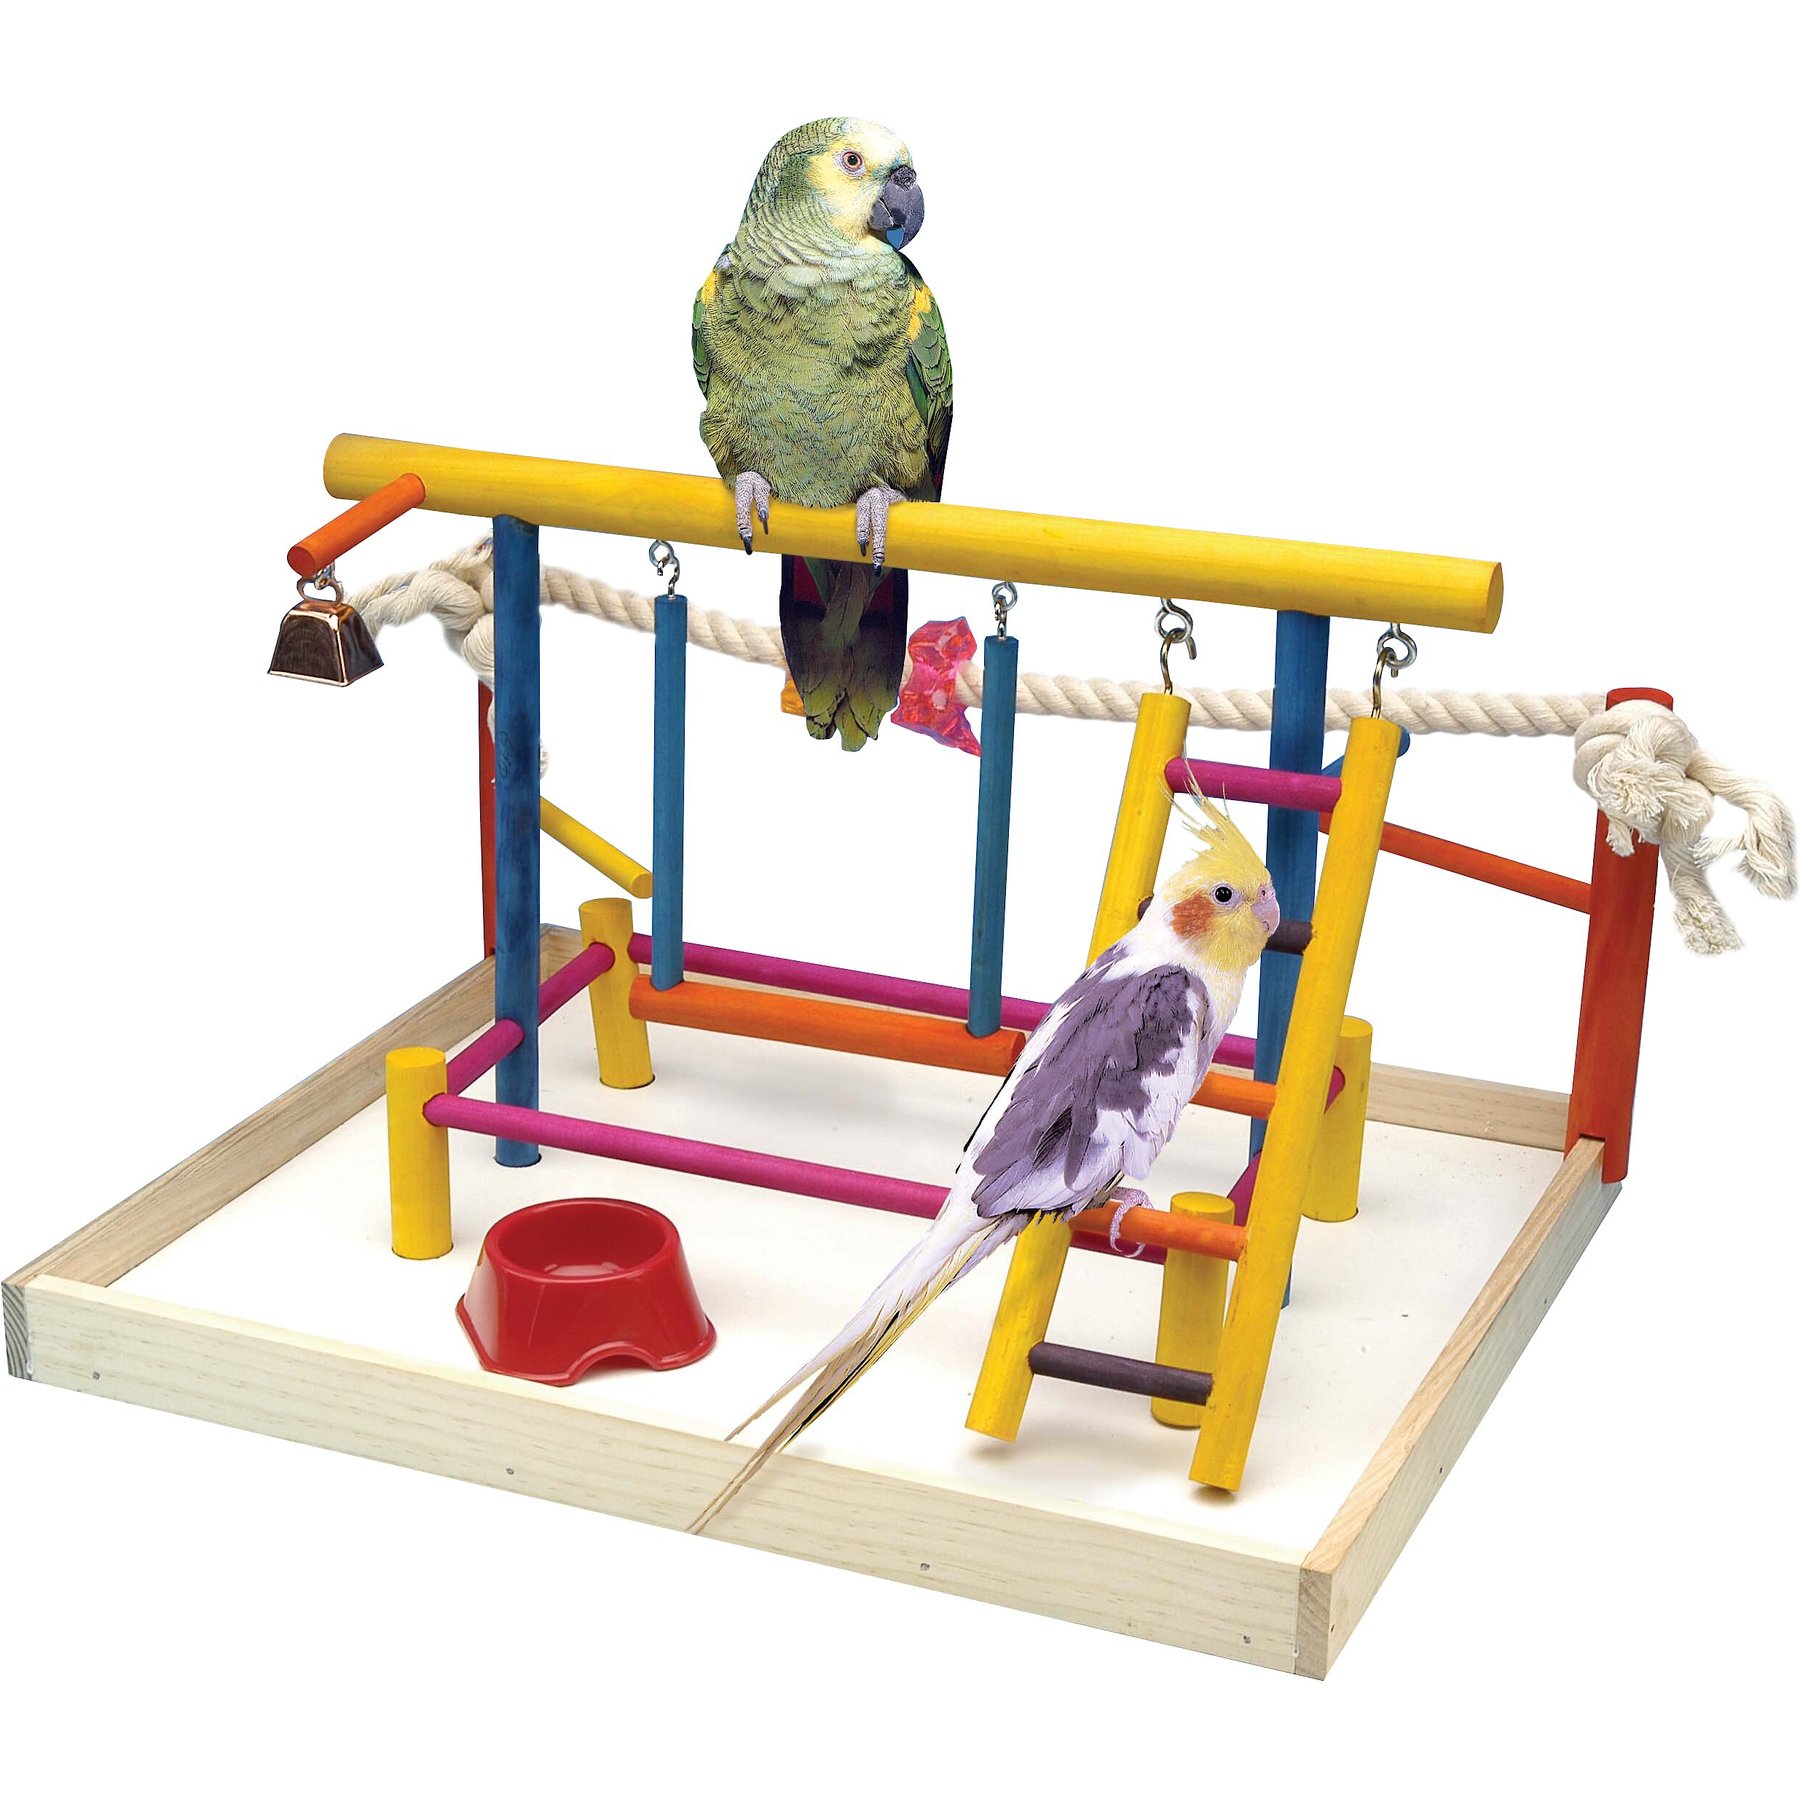 Parrot Rope Perch for Birds, Parrot Toys, Rope Bungee Bird Toy 1 Pack 4  Sizing Options 